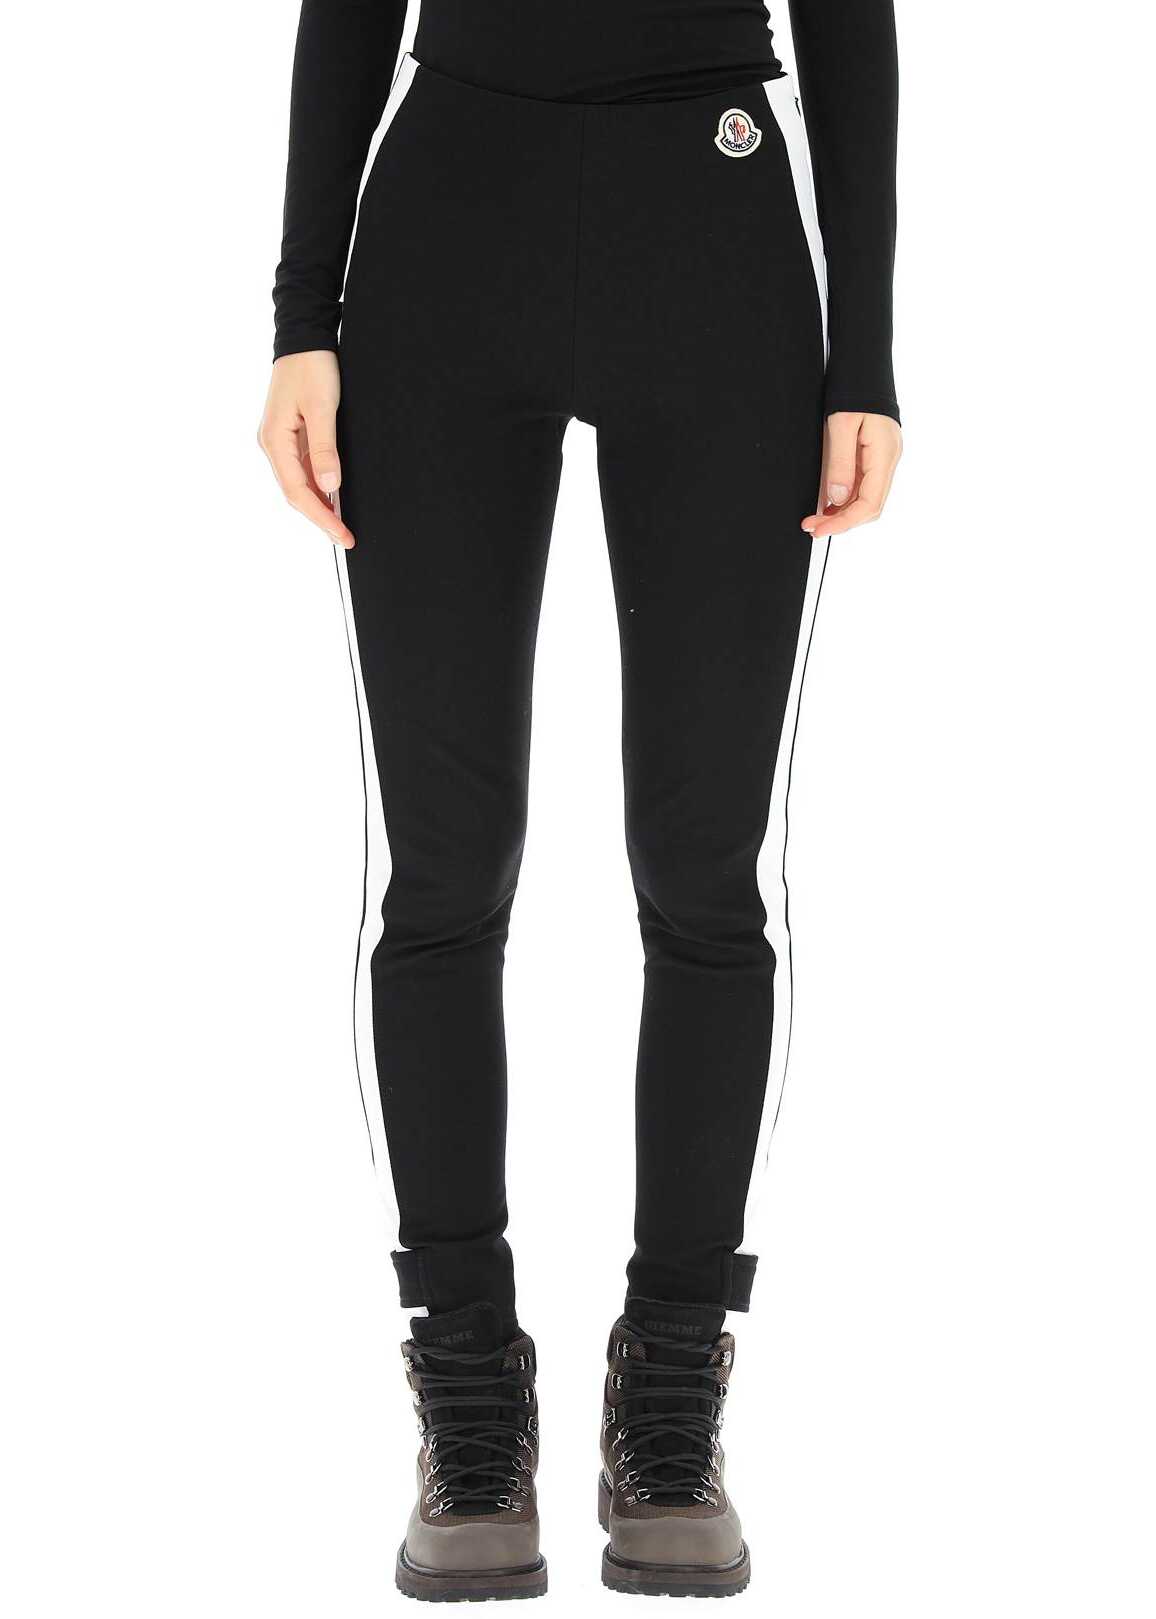 Moncler Basic Trousers With Side Bands 2A000 03 53064 BLACK